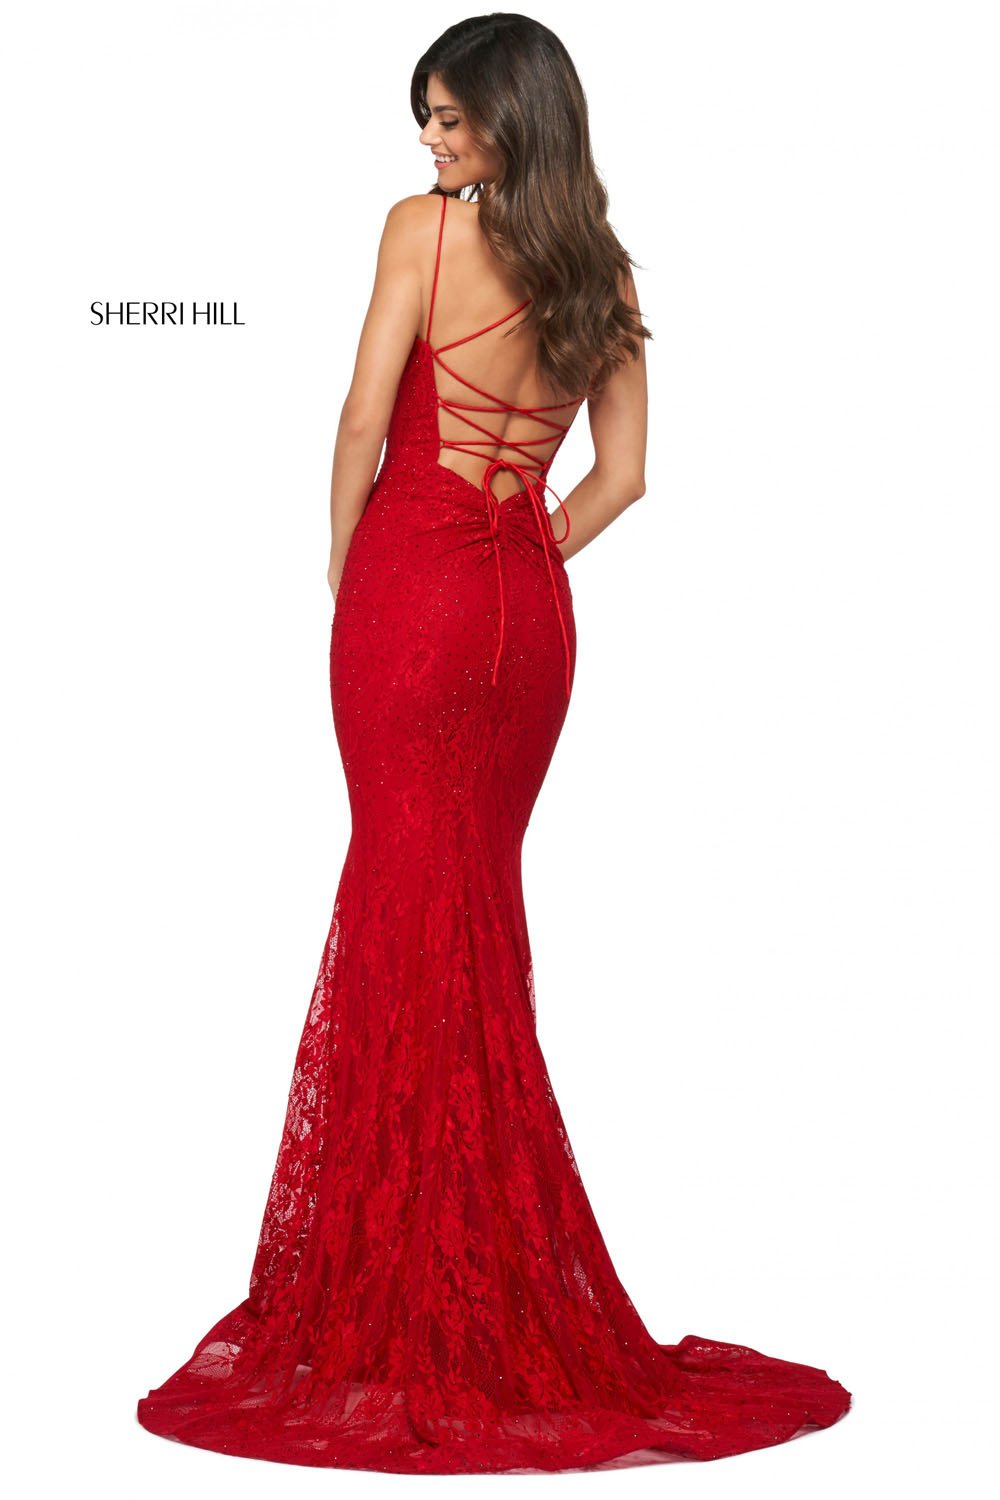 Sherri Hill 53364 dress images in these colors: Pink, Navy, Royal, Red, Ivory, Black, Aqua.